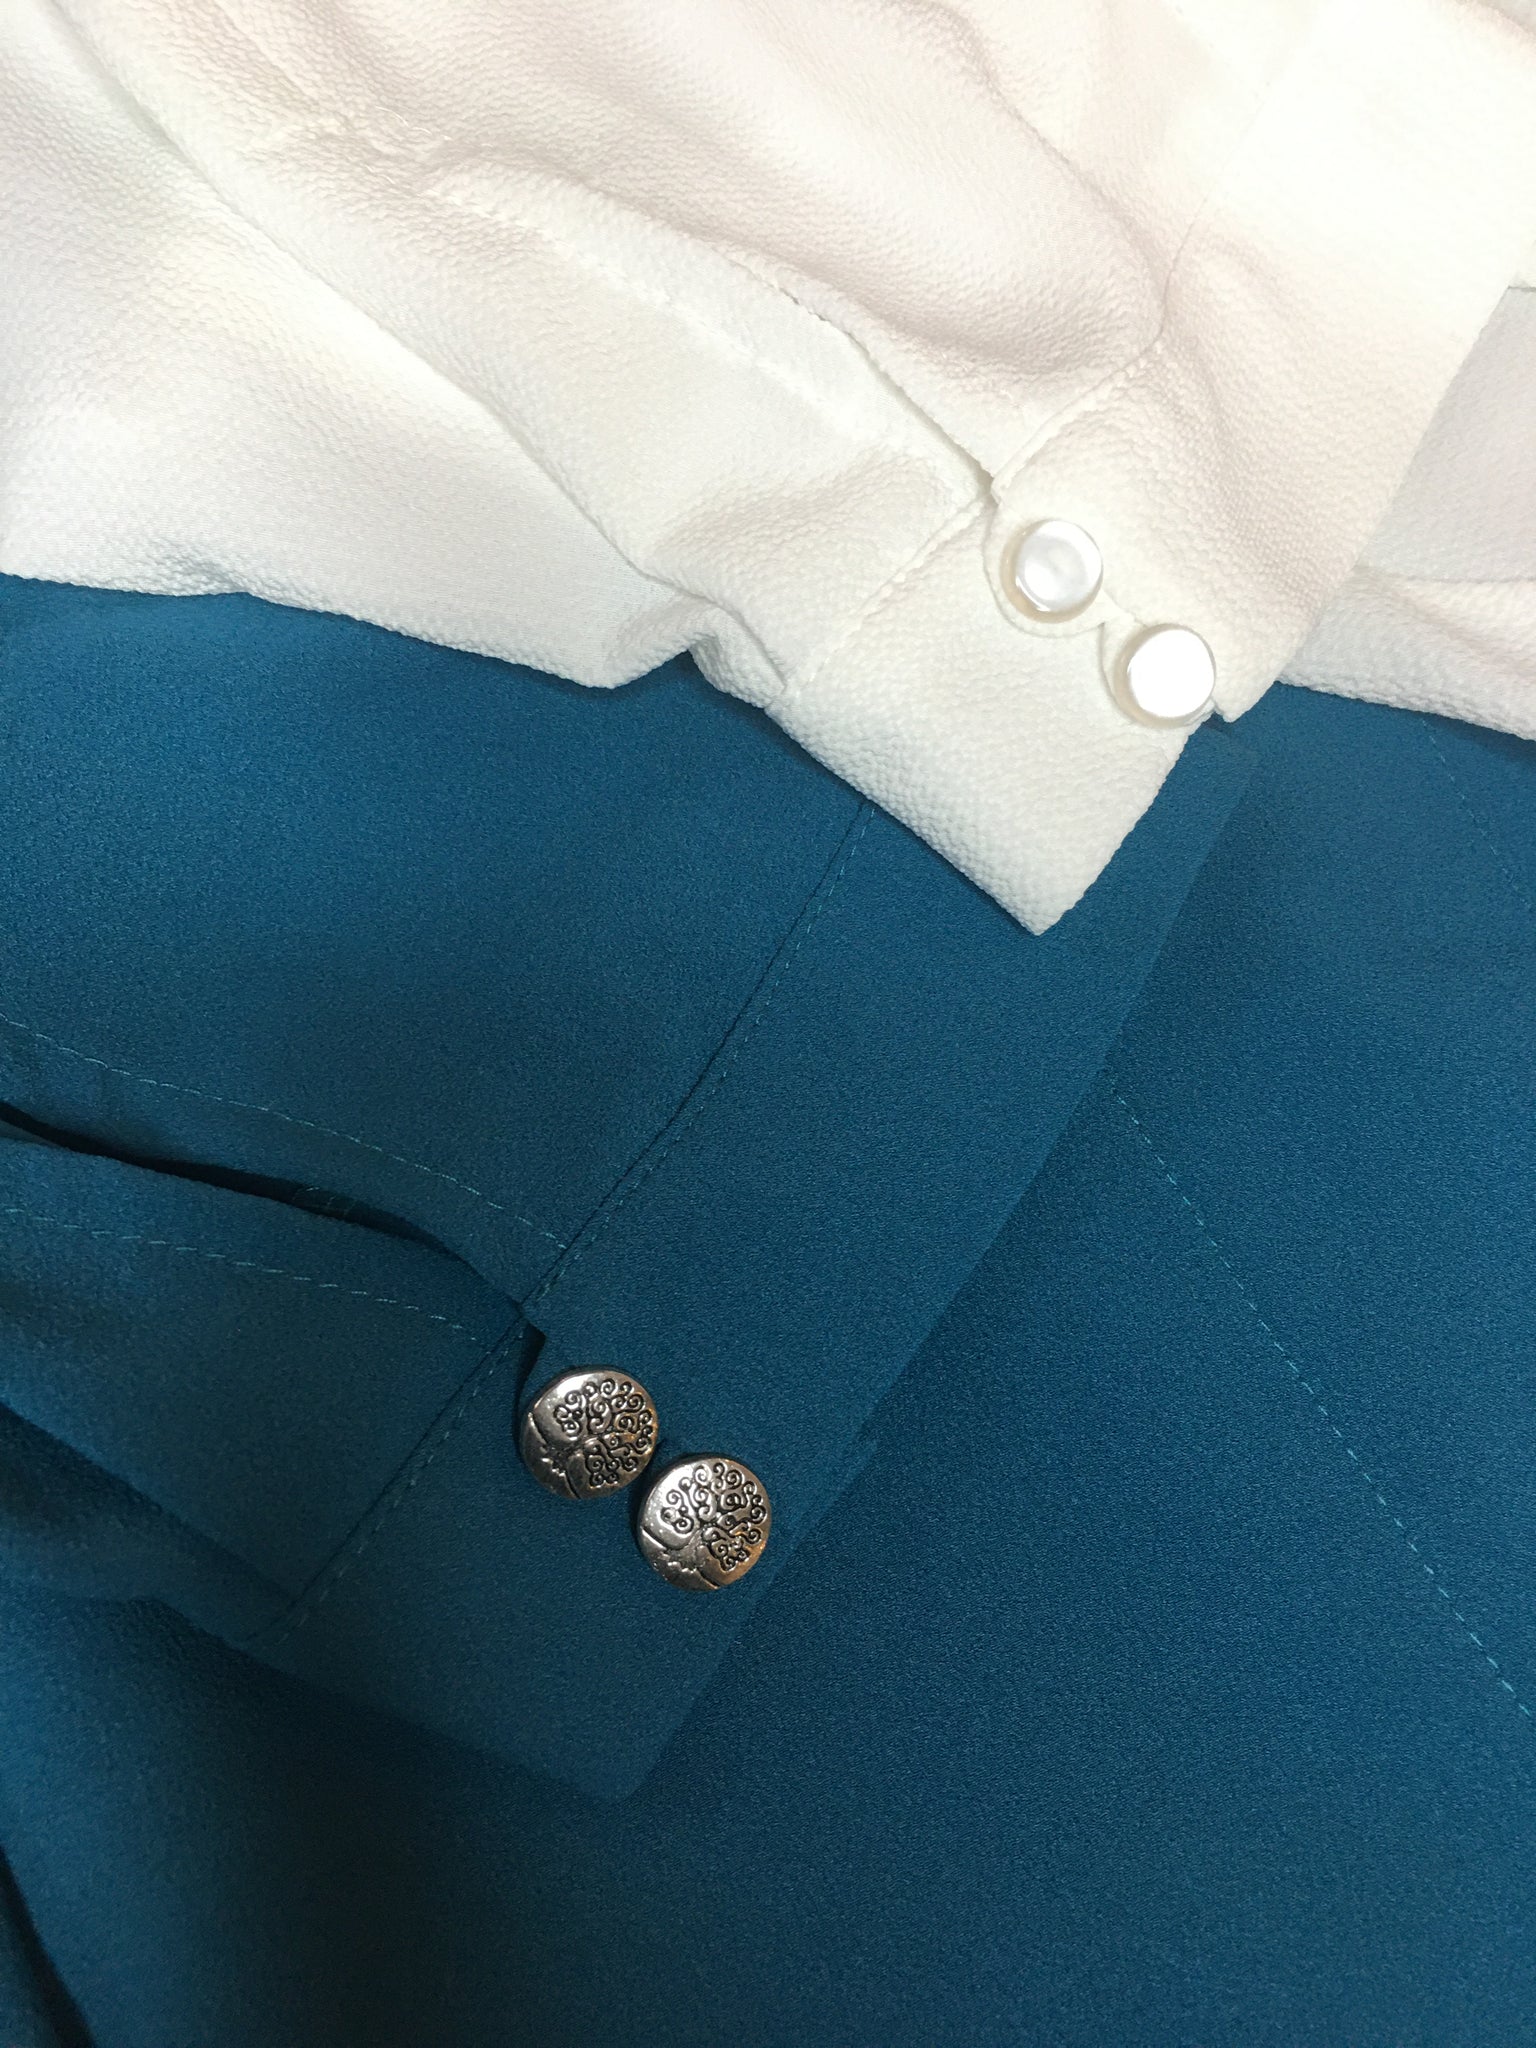 Bella blouse details - buttons may vary